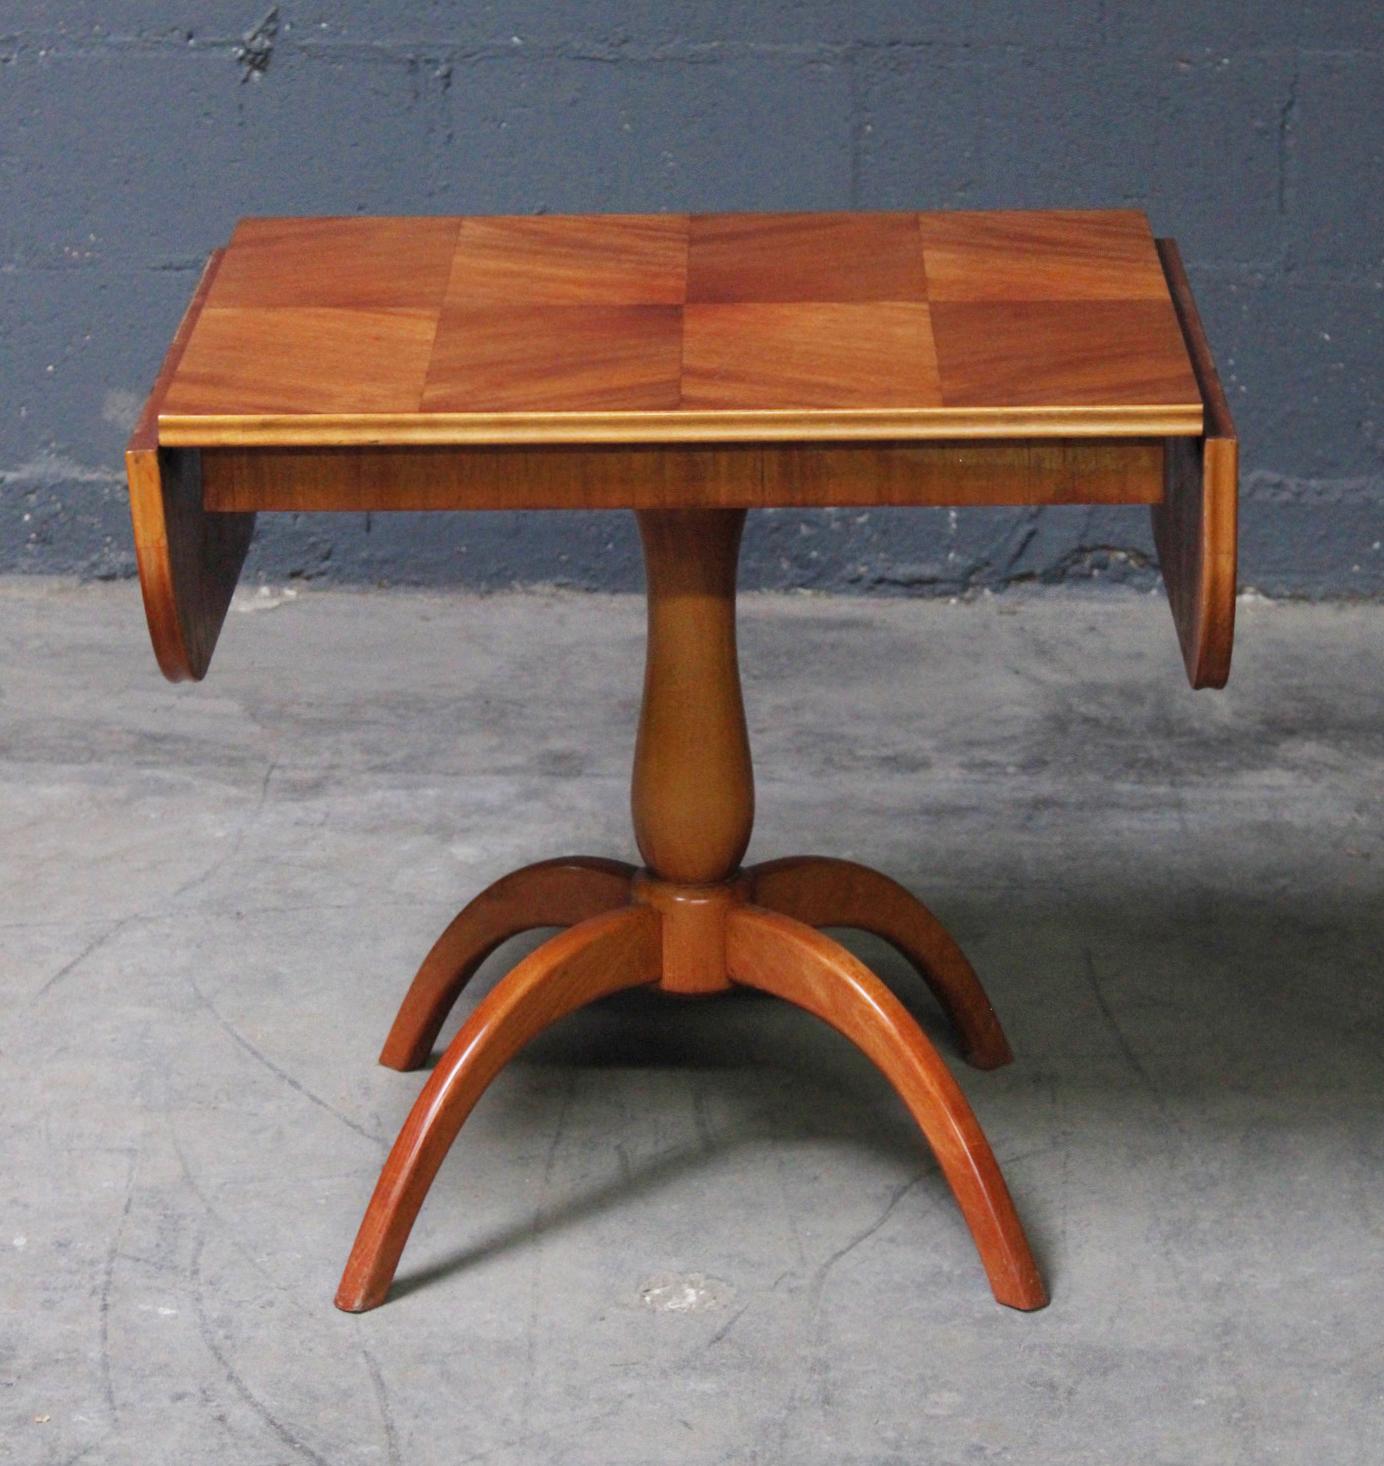 Mahogany pedestal side table with two foldable 6.5